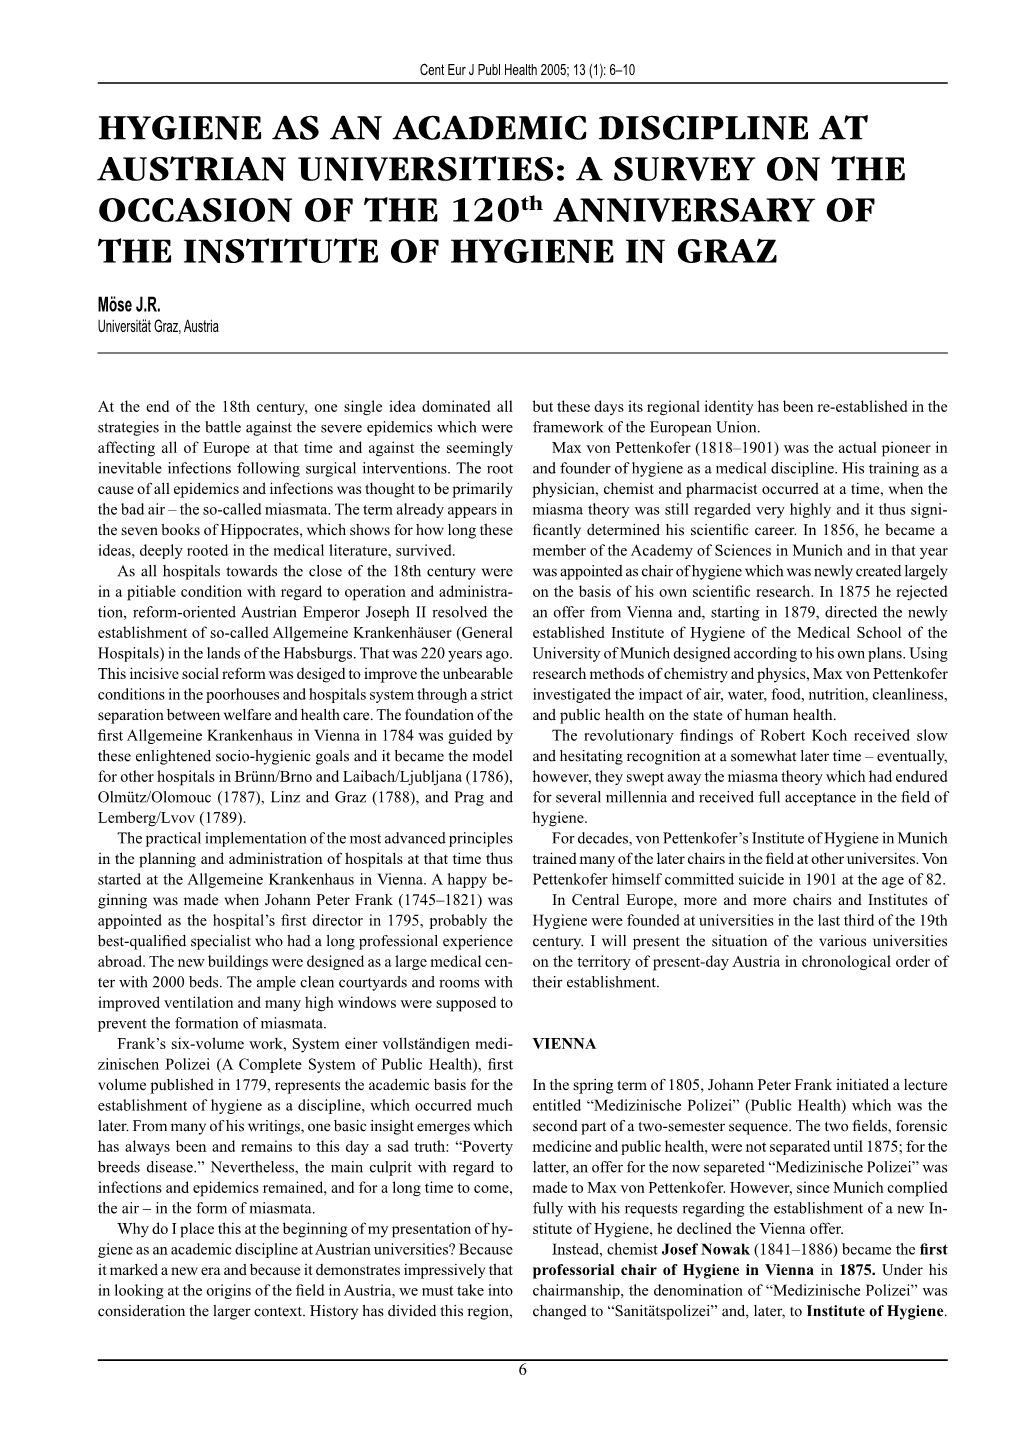 HYGIENE AS an ACADEMIC DISCIPLINE at AUSTRIAN UNIVERSITIES: a SURVEY on the OCCASION of the 120Th ANNIVERSARY of the INSTITUTE of HYGIENE in GRAZ